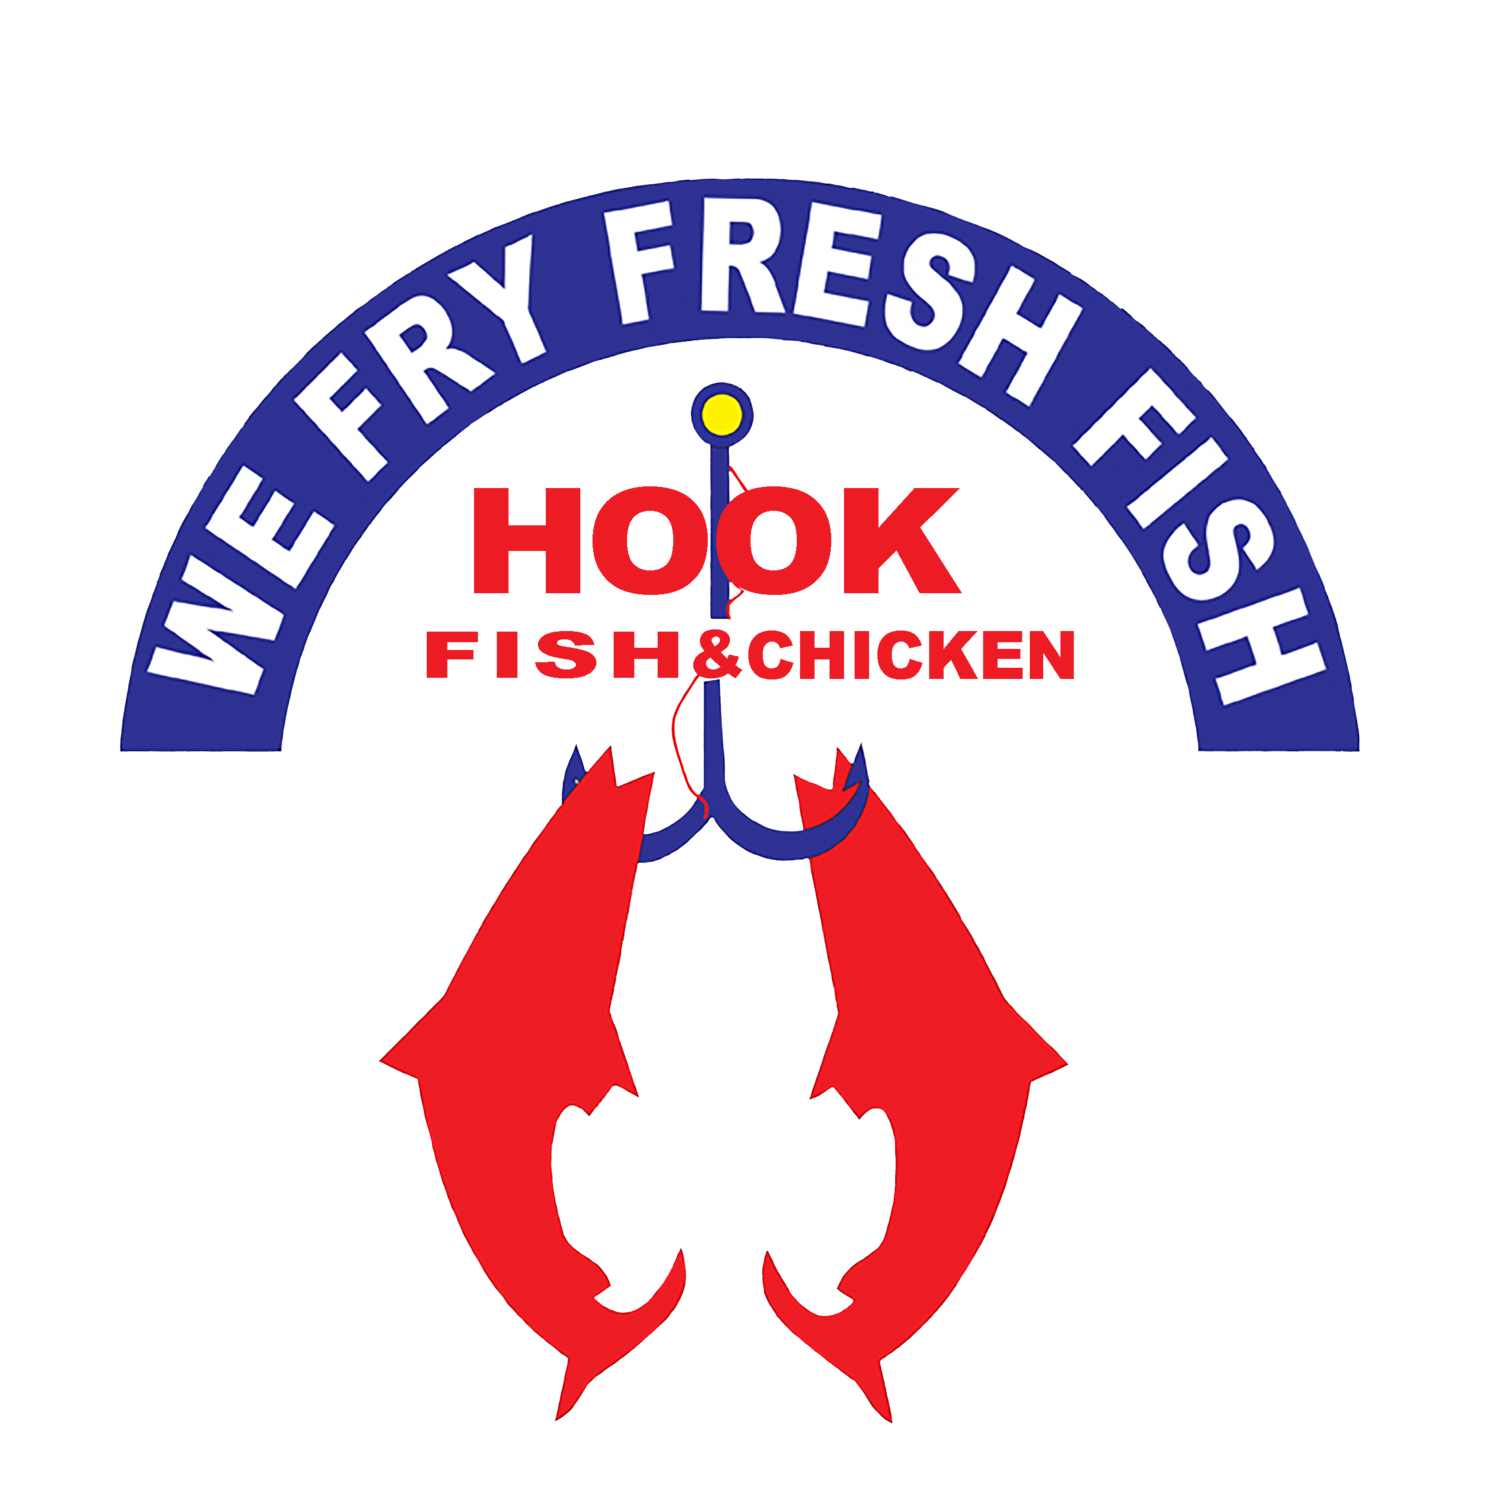 HOOK FISH AND CHICKEN